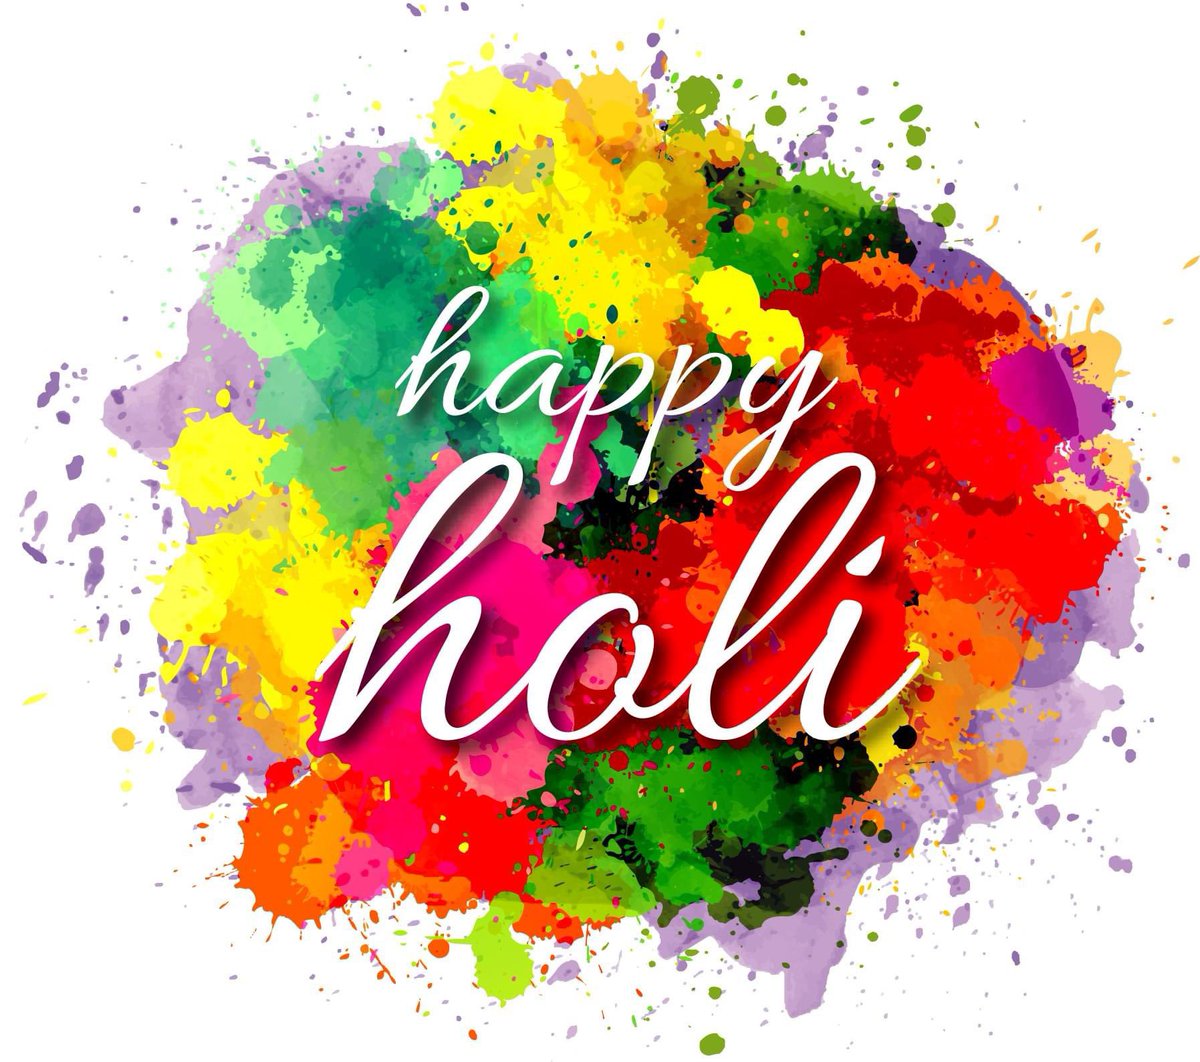 Happy Holi! May your life be filled with colors of love, friendship and happiness! @School5Yonkers